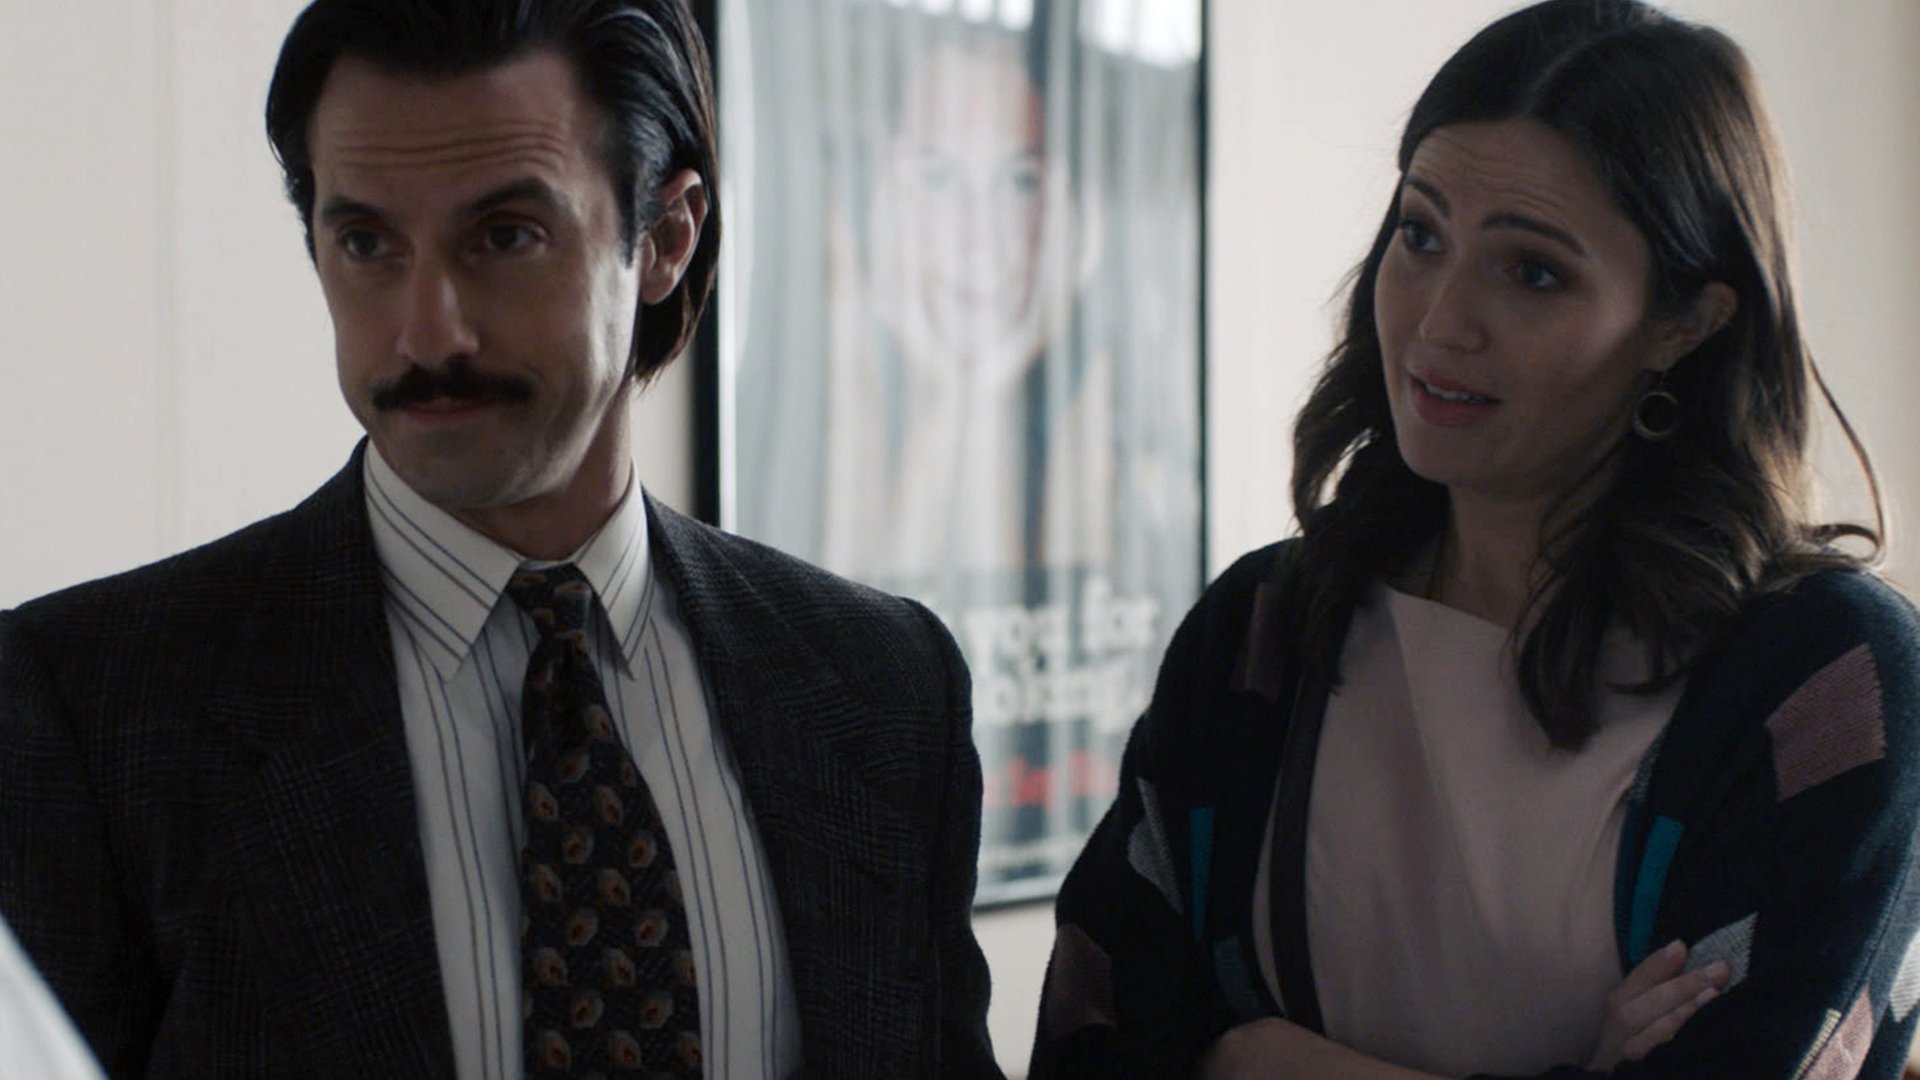 Milo Ventimiglia as Jack and Mandy Moore as Rebecca on 'This Is Us' Season 5